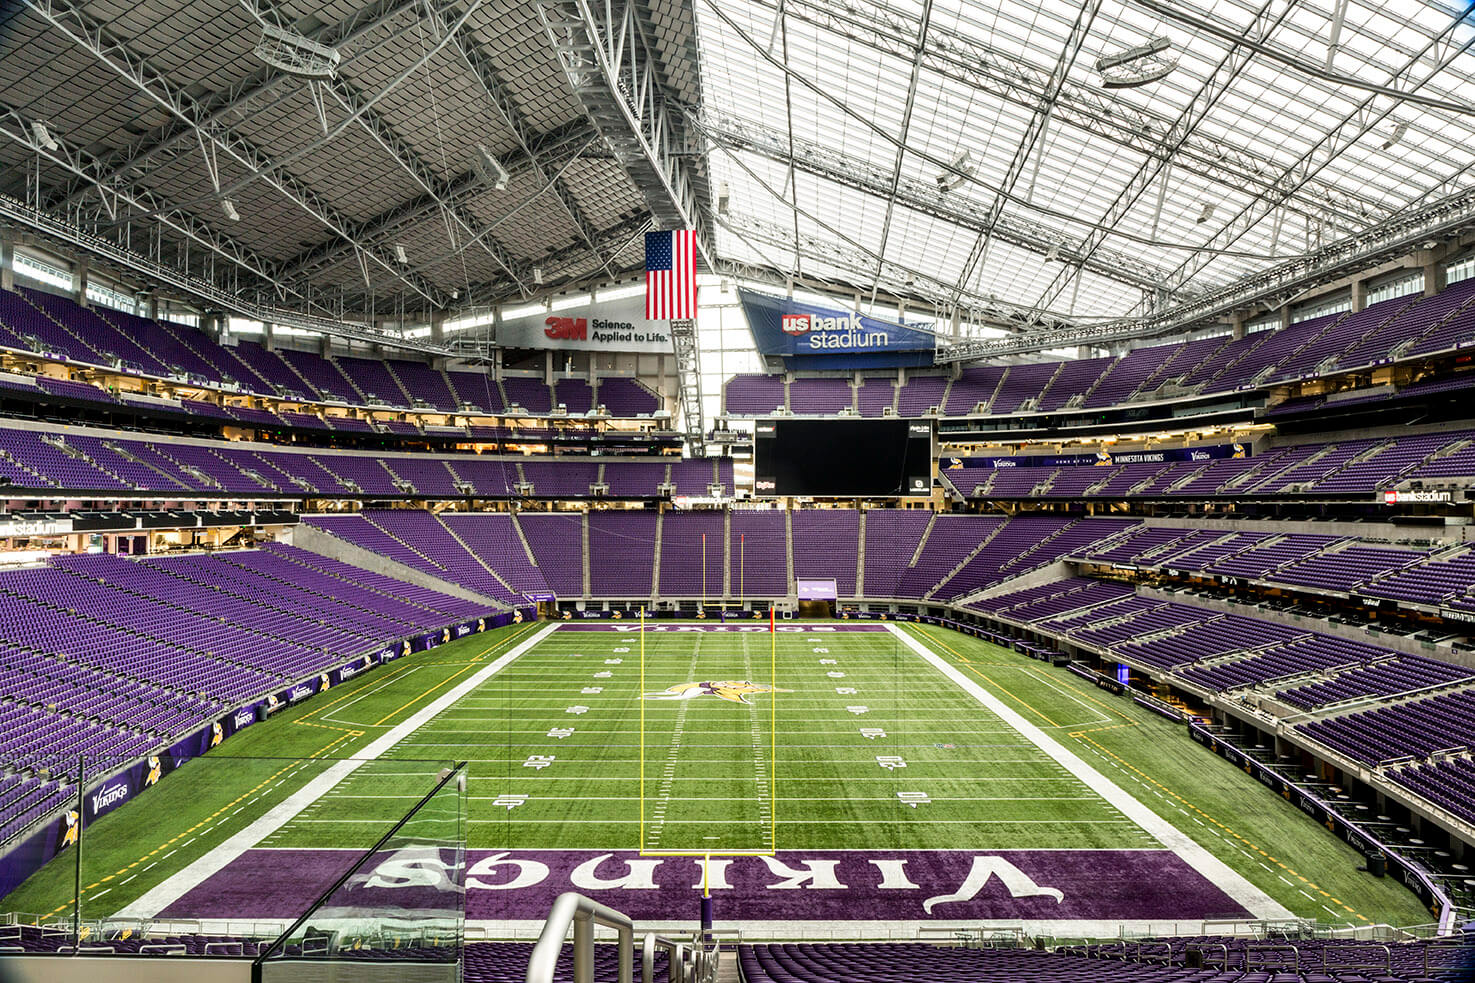 Minnesota Vikings US Bank Stadium Completed A Month Ahead of Schedule